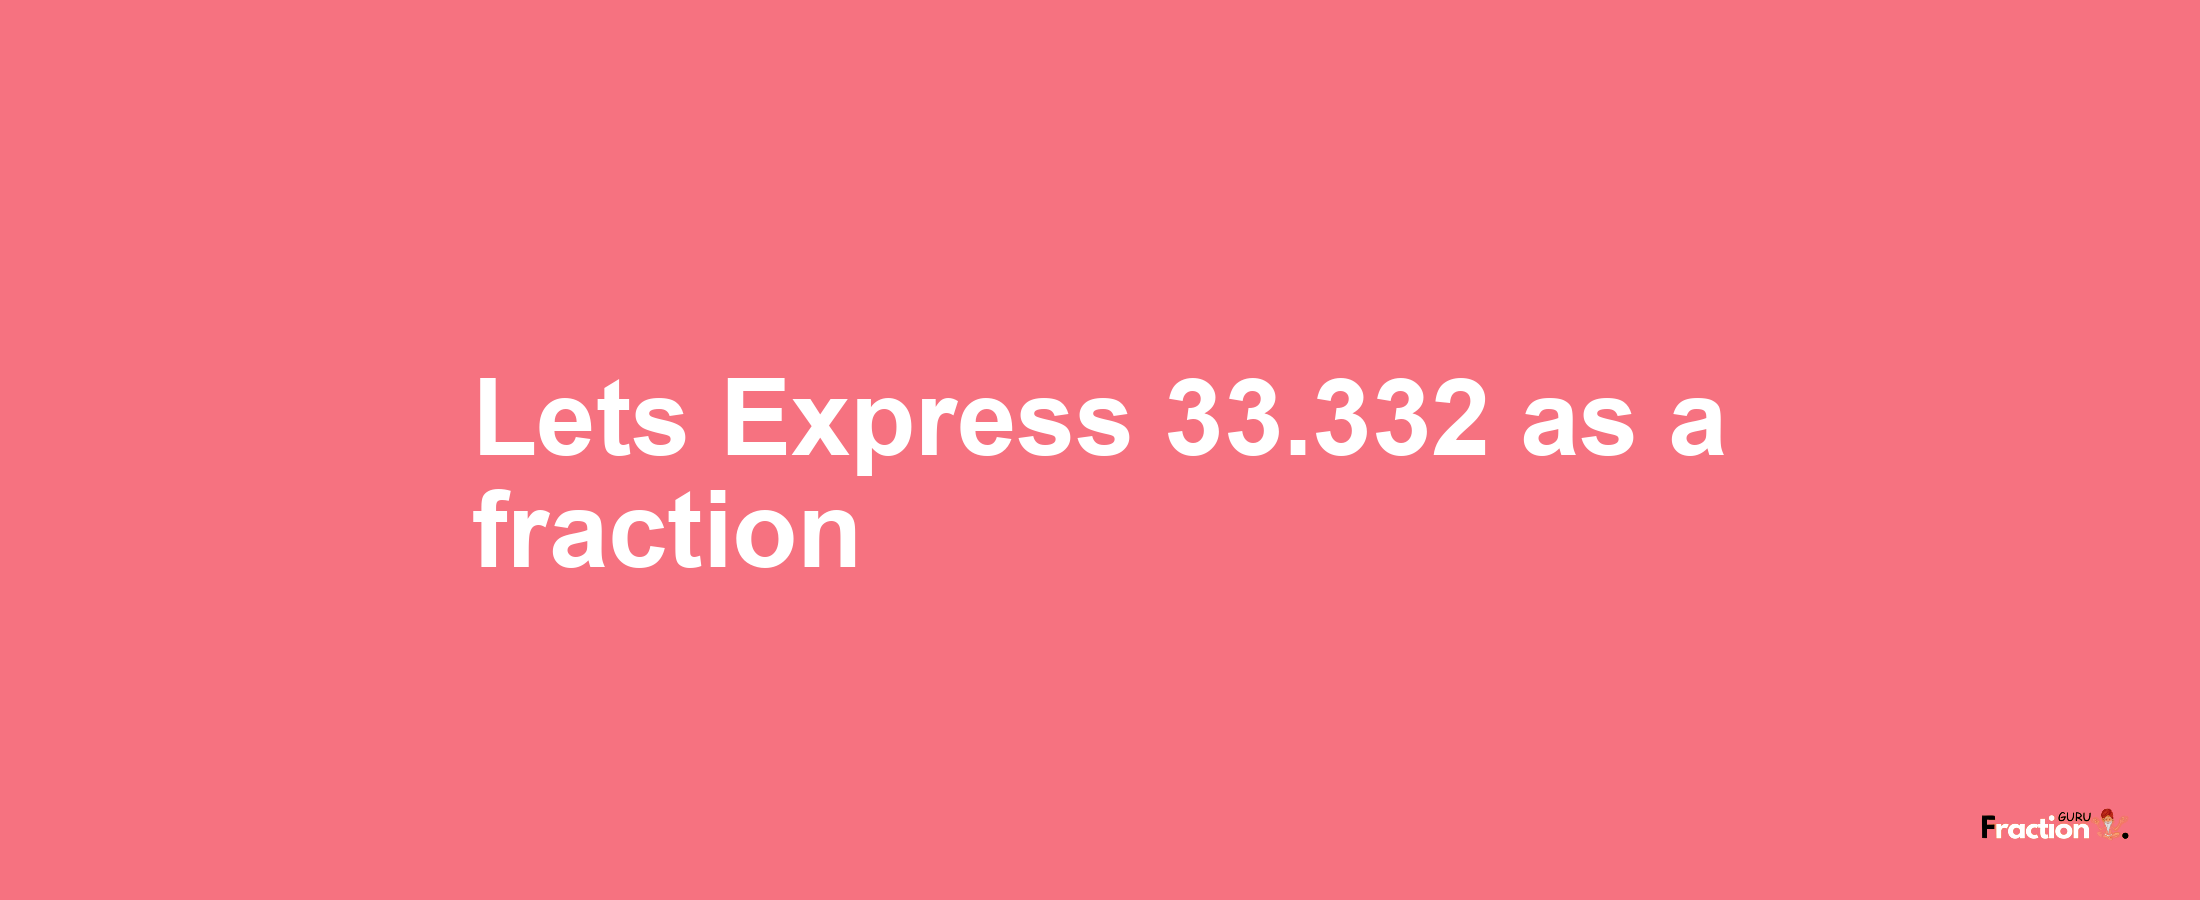 Lets Express 33.332 as afraction